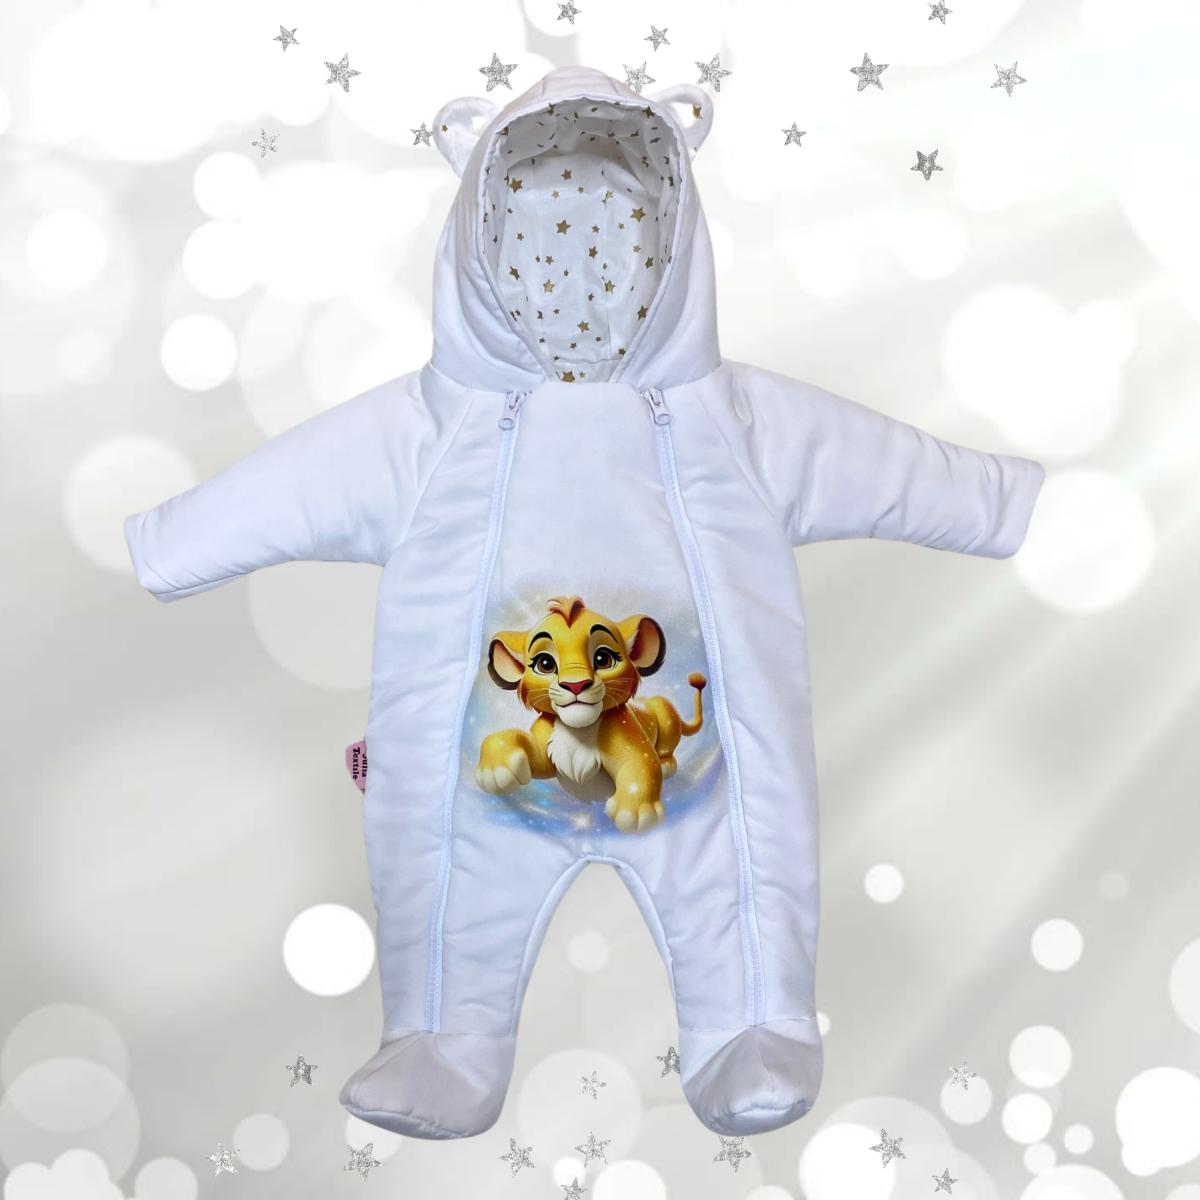 Simba Winter Onesie: A Warm Hug from the Lion King